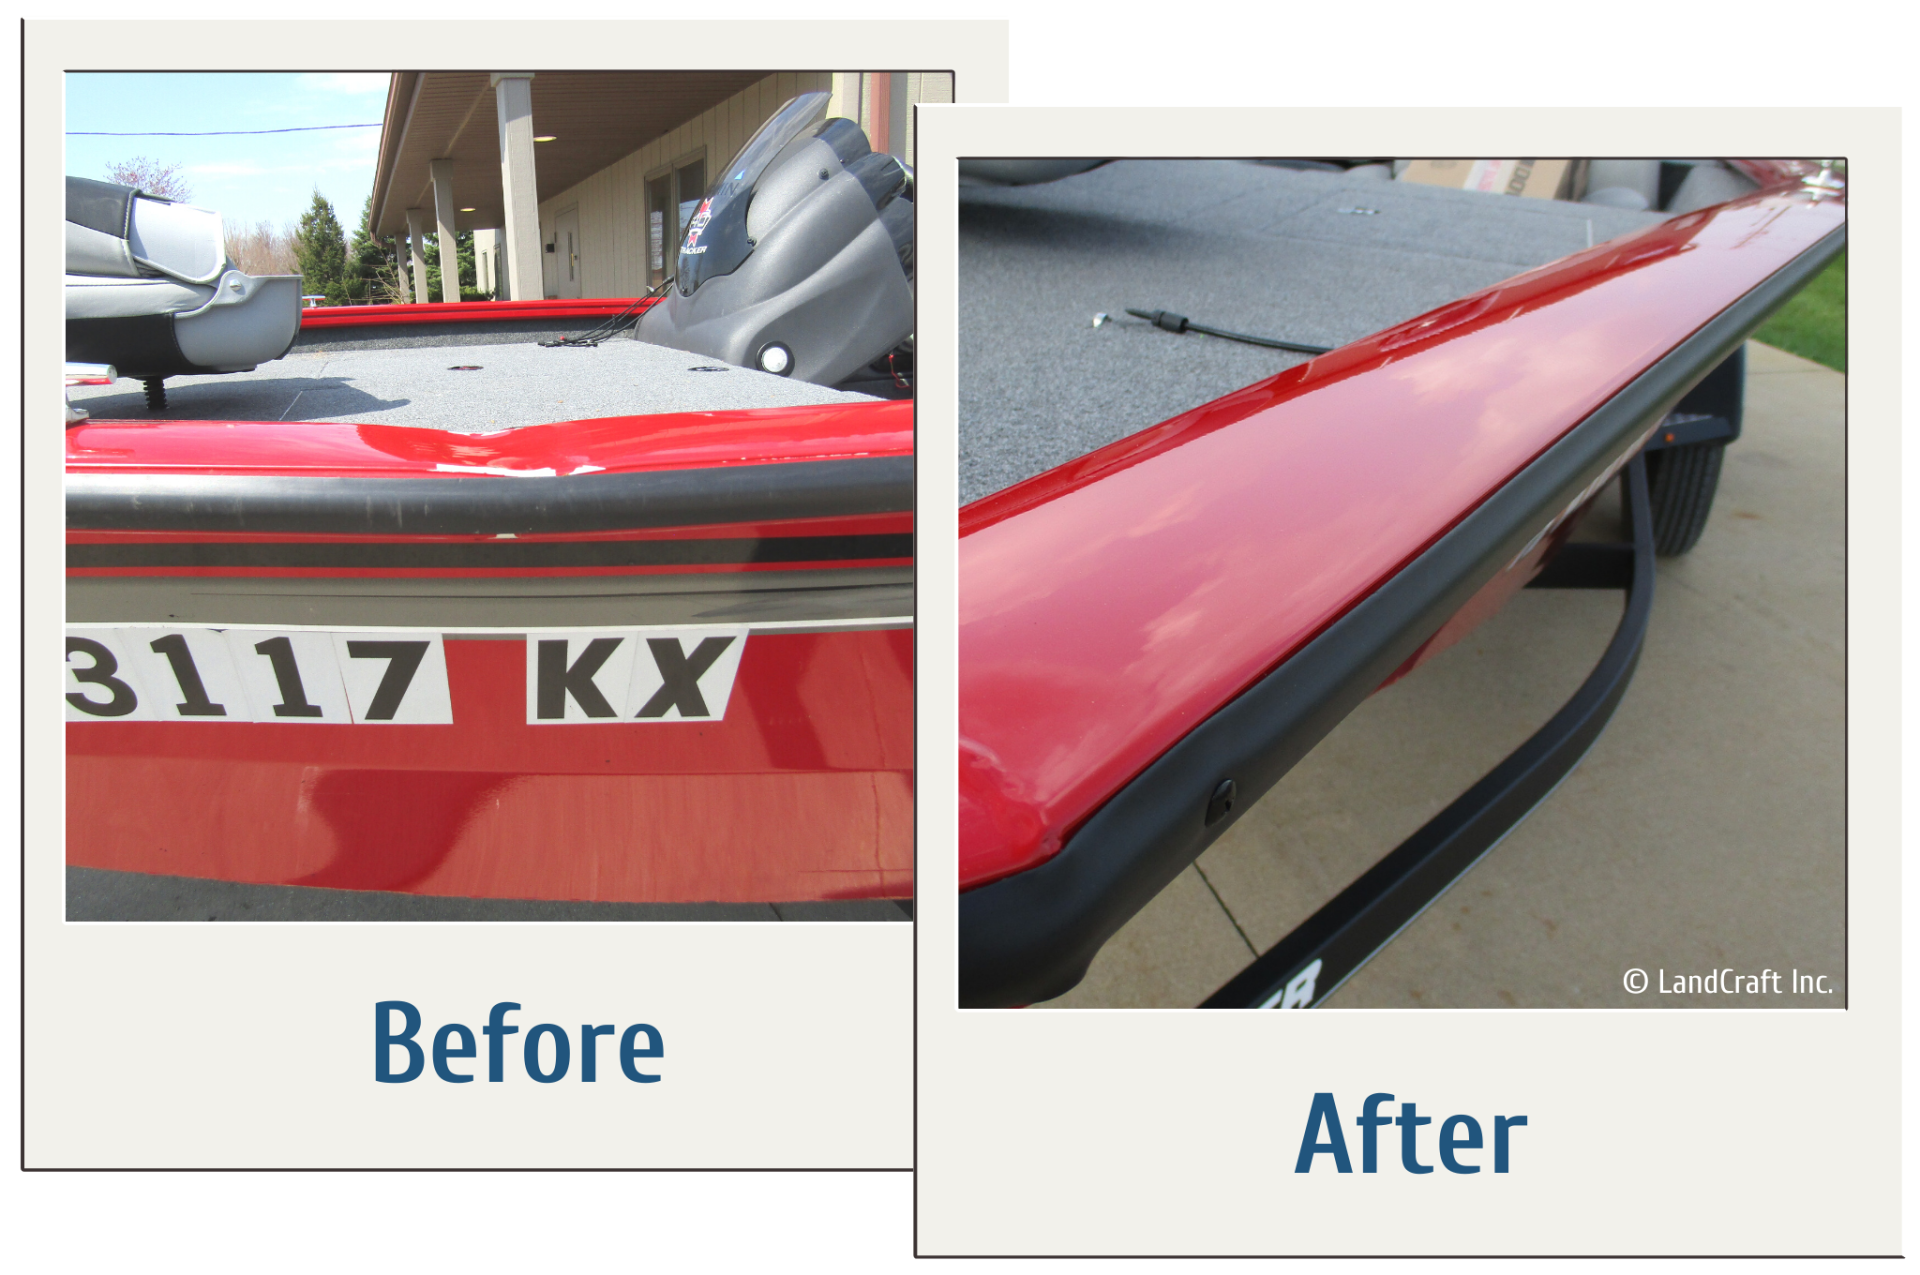 Before and after of an aluminum dent repair on an aluminum boat